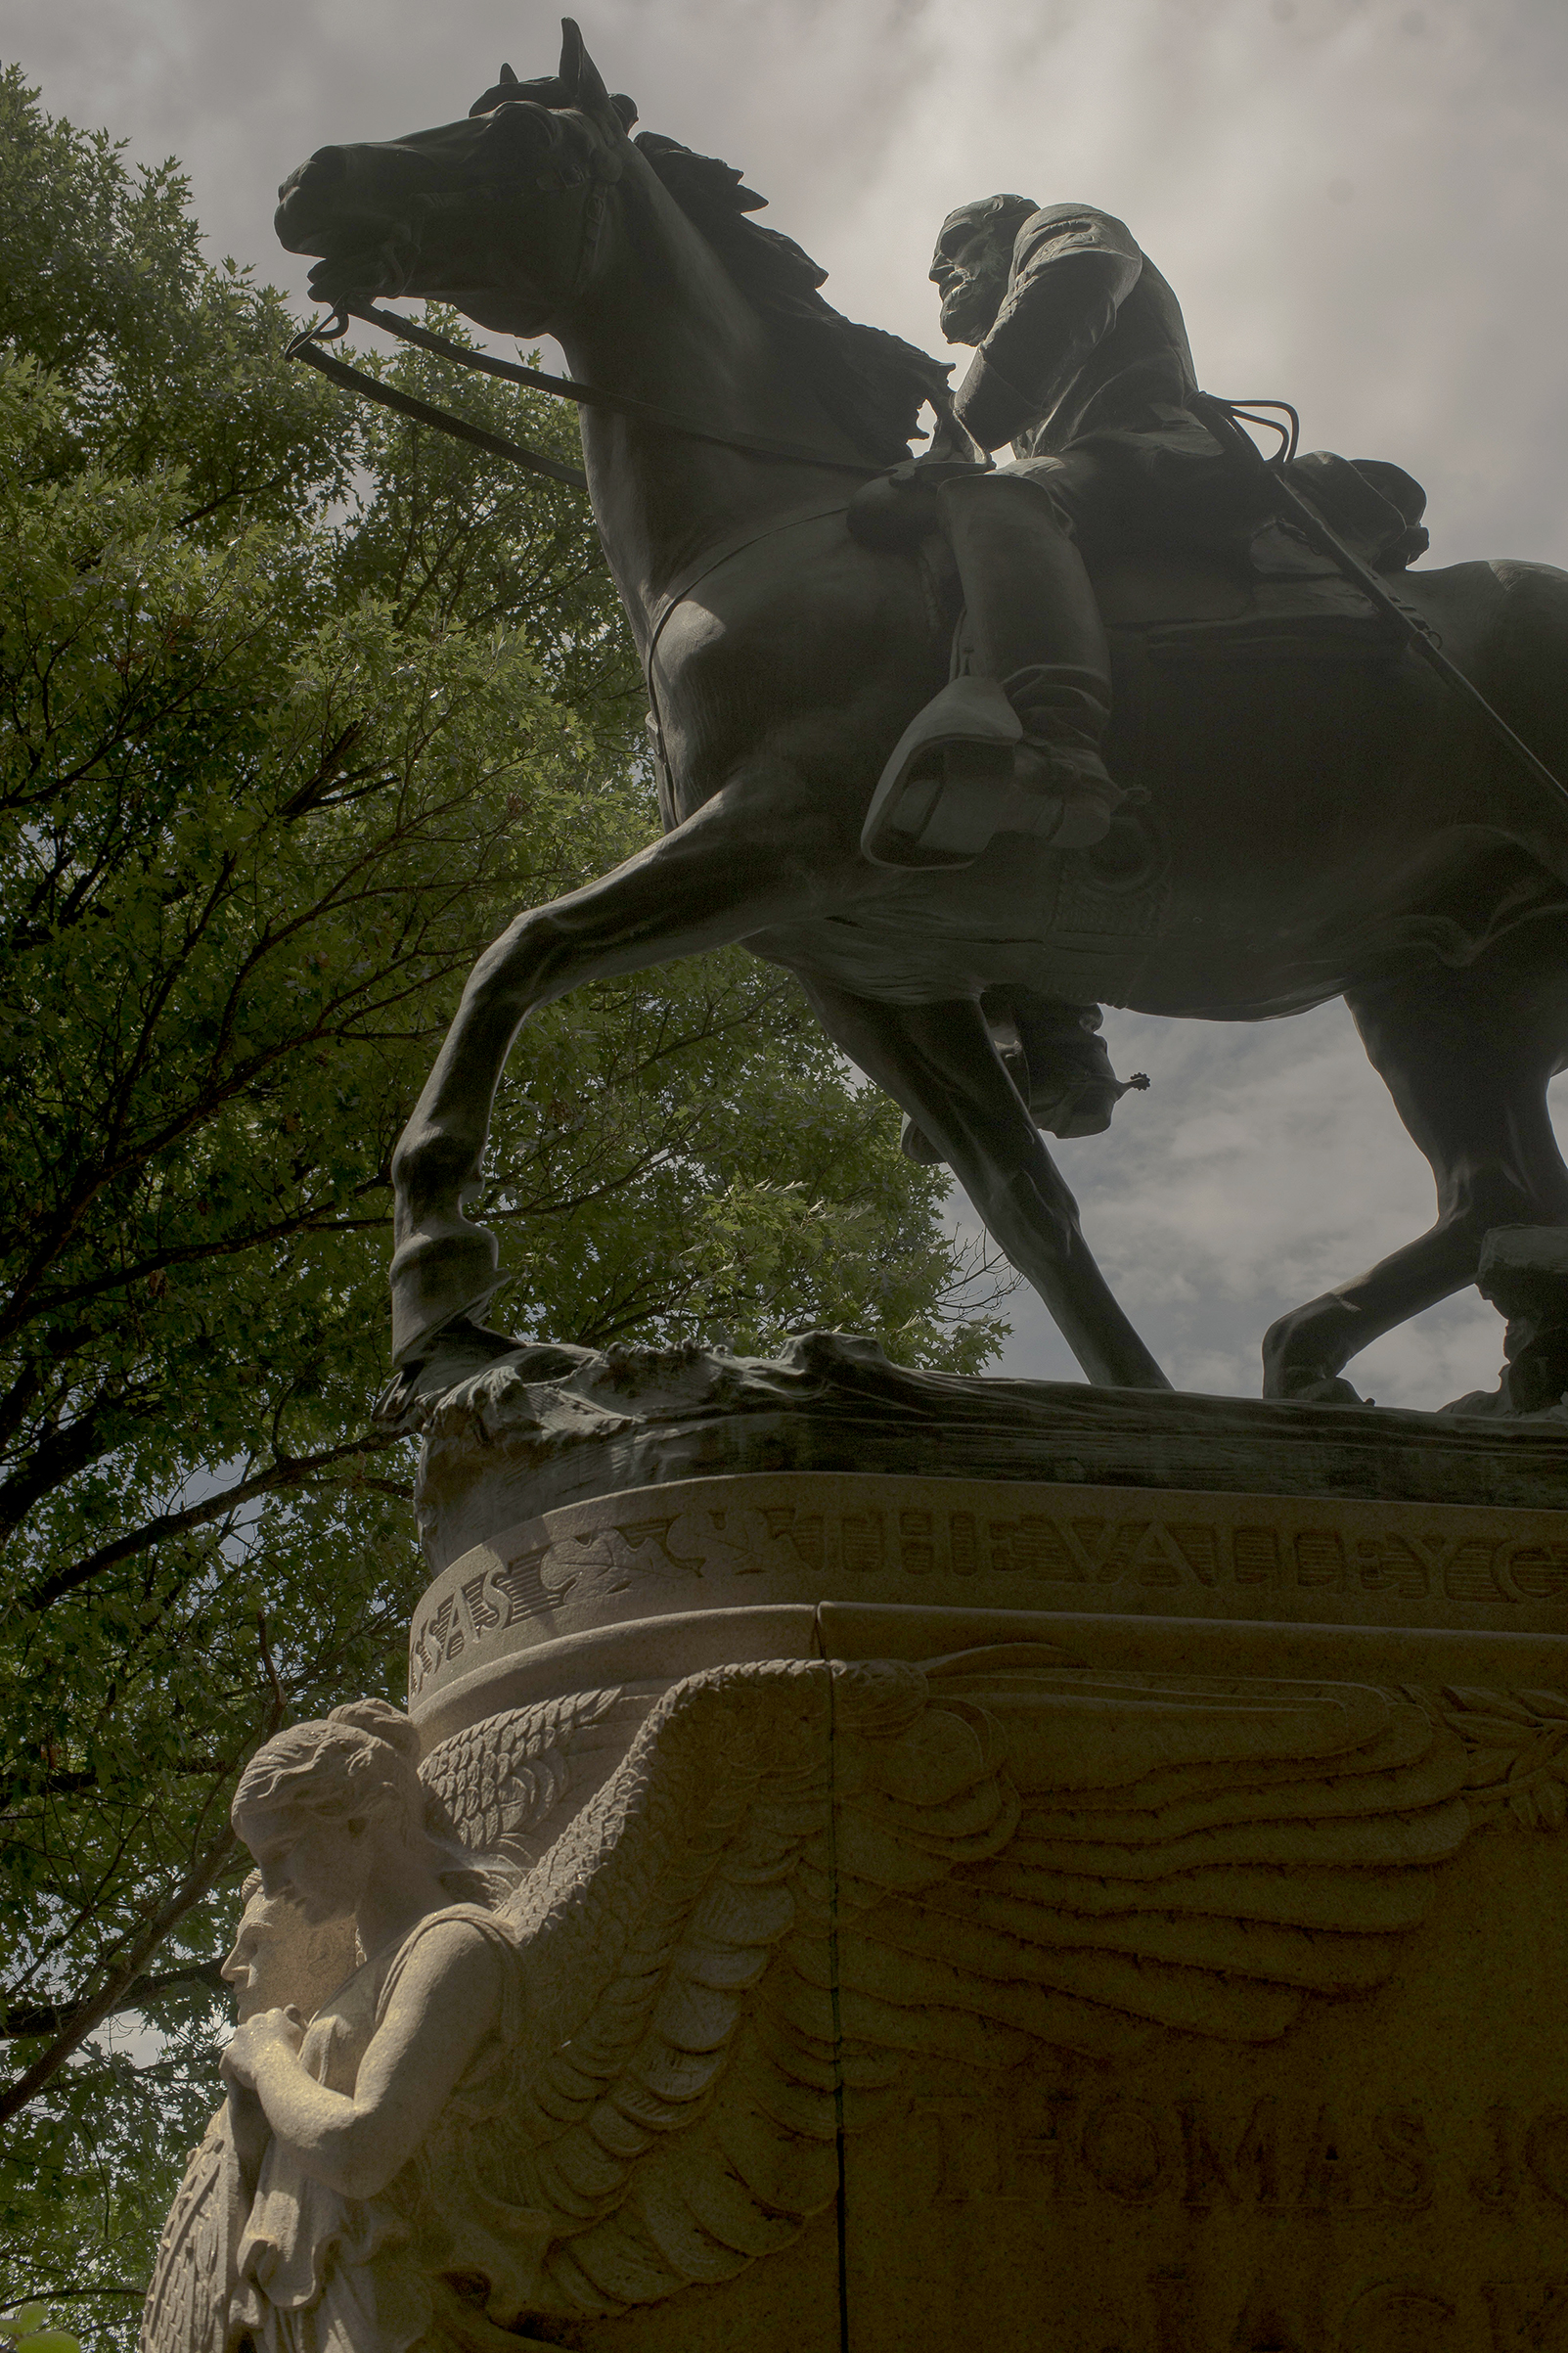 White supremacists rallied in Charlottesville against the removal of Confederate statues, like Stonewall Jackson